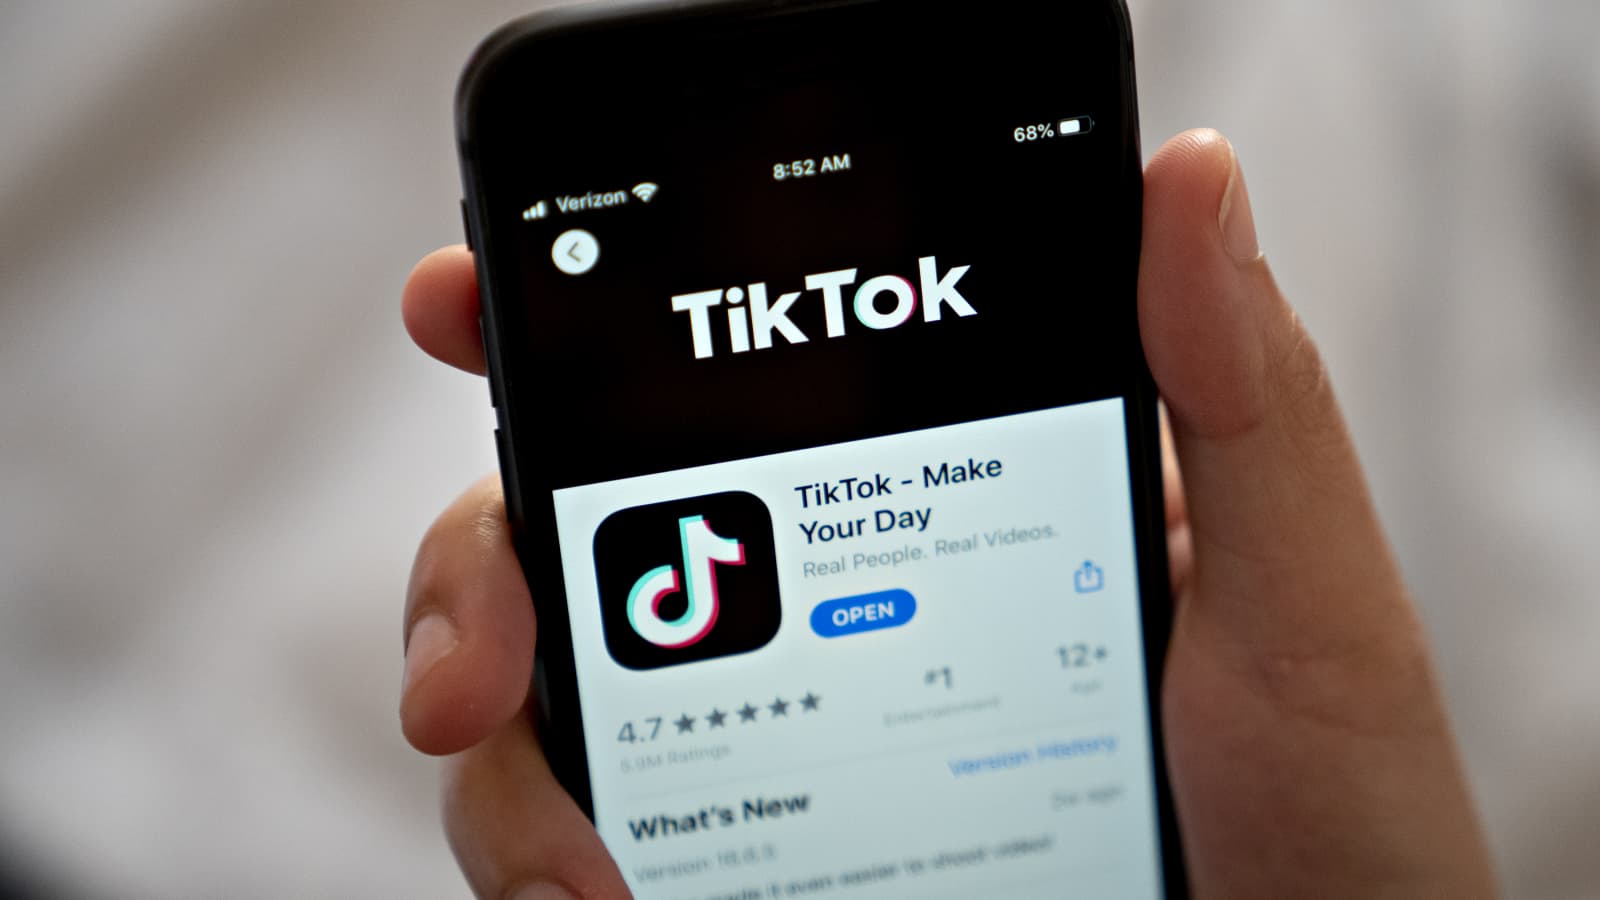 TikTok insiders say Chinese parent ByteDance is in control